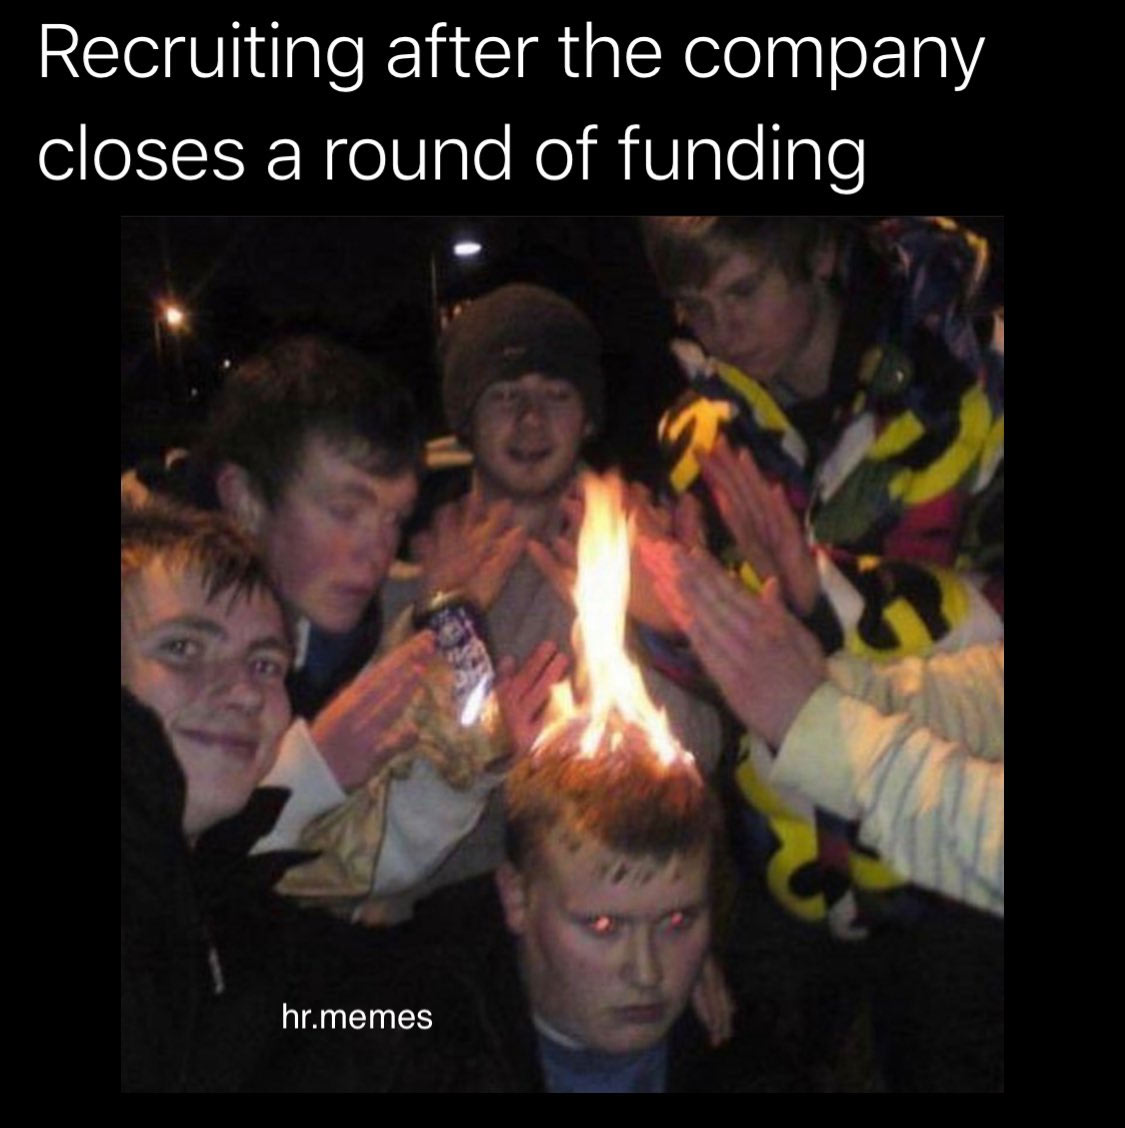 clean work memes - school shooter memes - Recruiting after the company closes a round of funding hr.memes